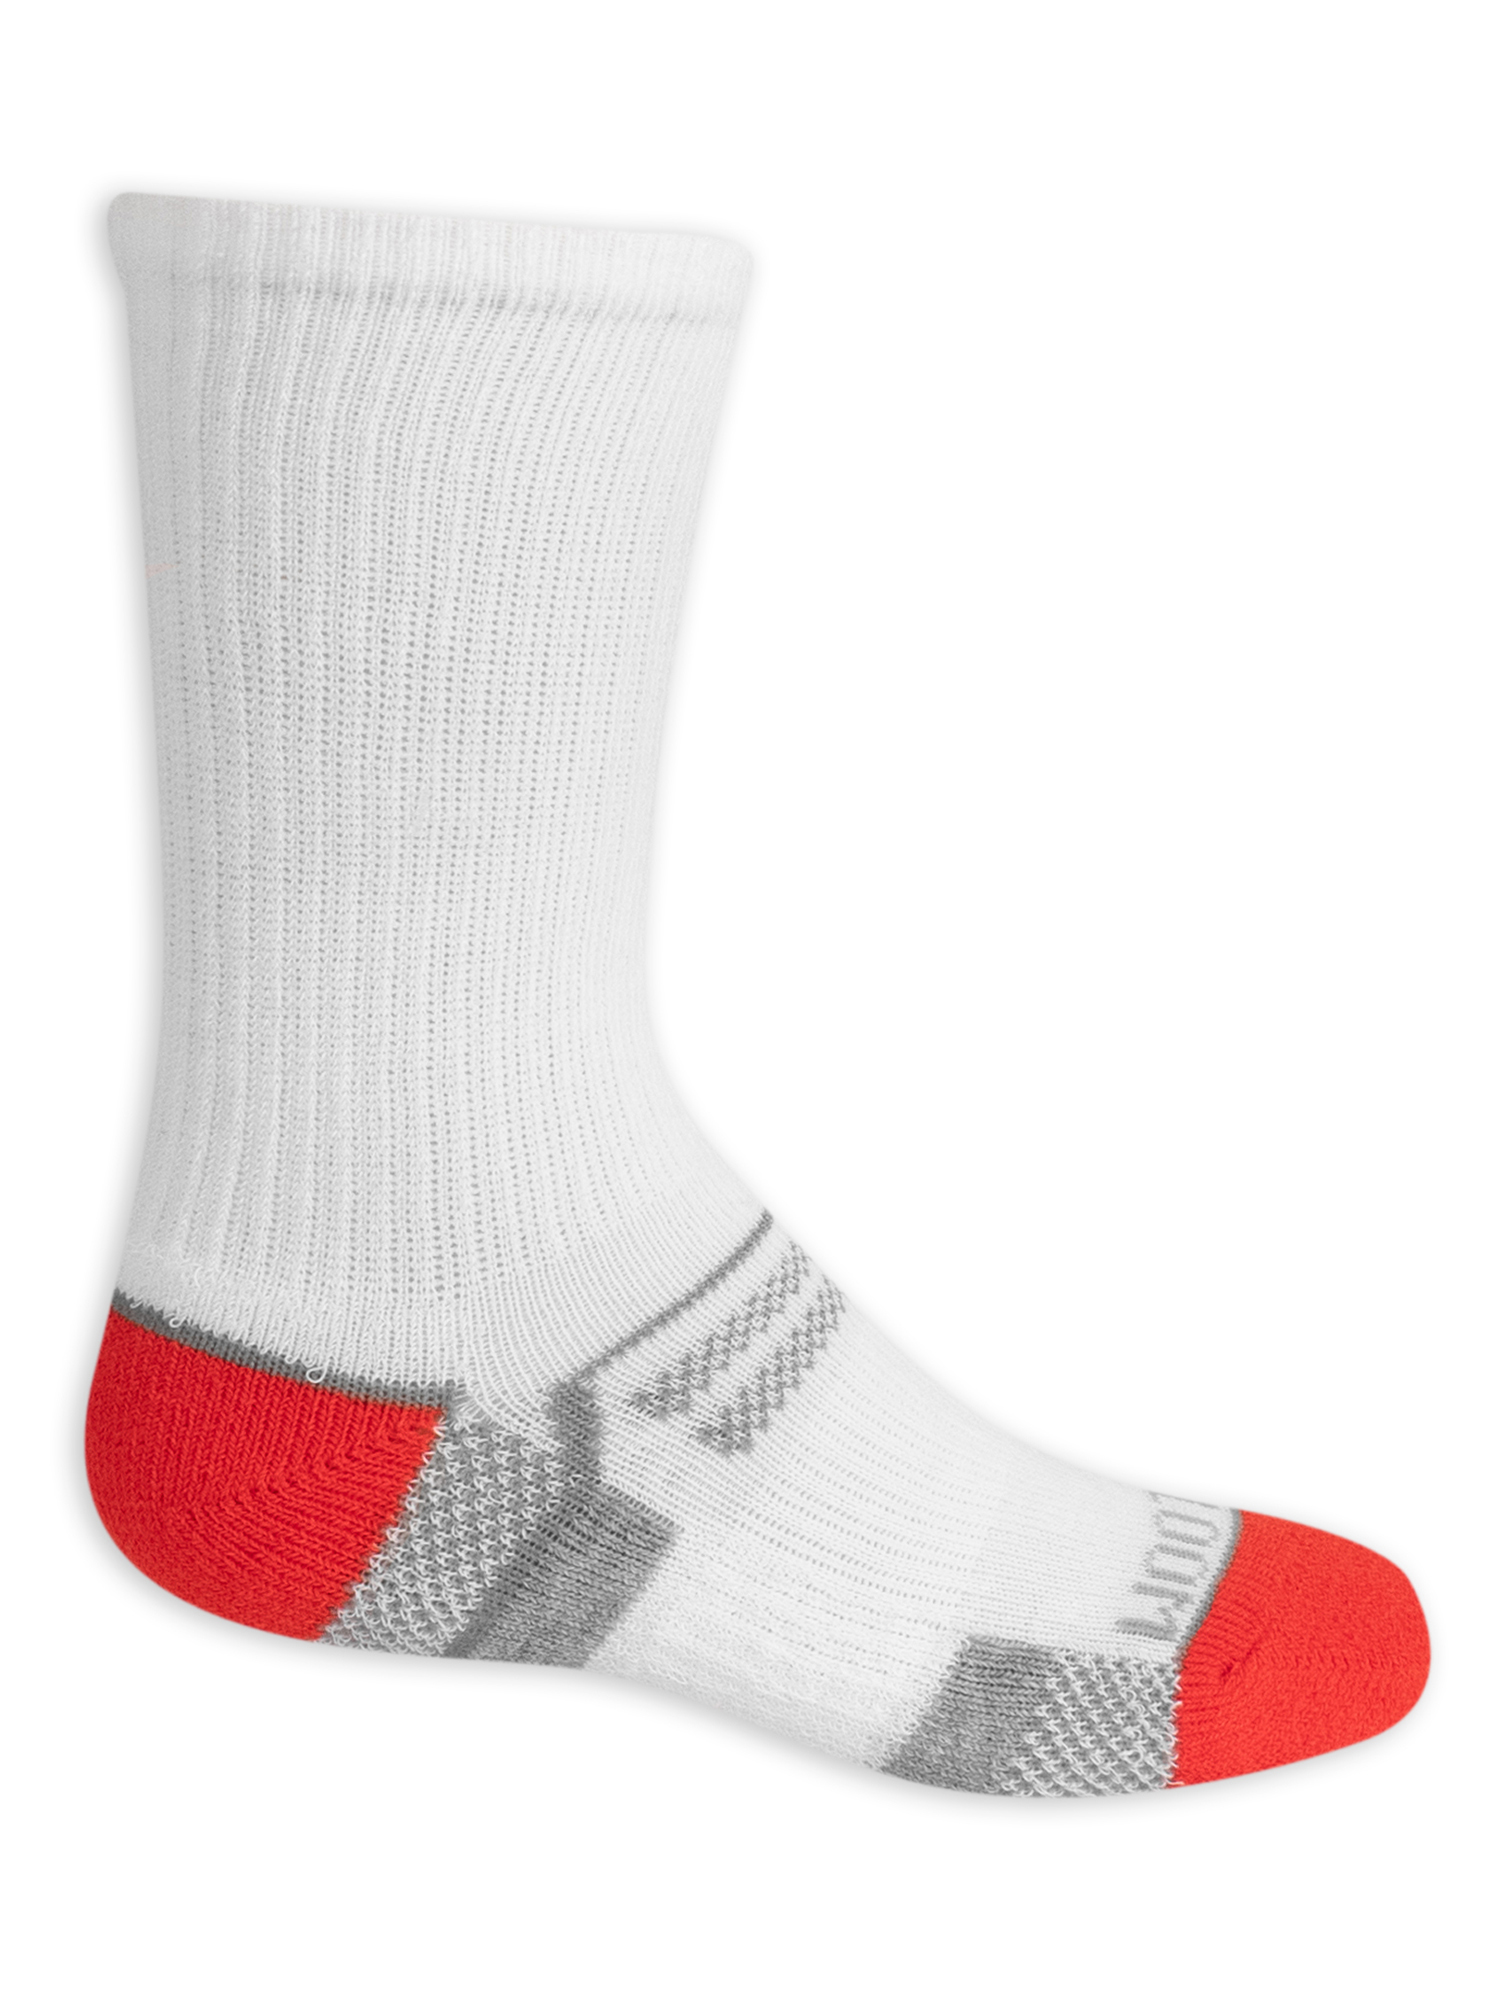 Fruit of the Loom Boys Active Crew Socks, 12 Pack, Sizes S-L - image 2 of 5